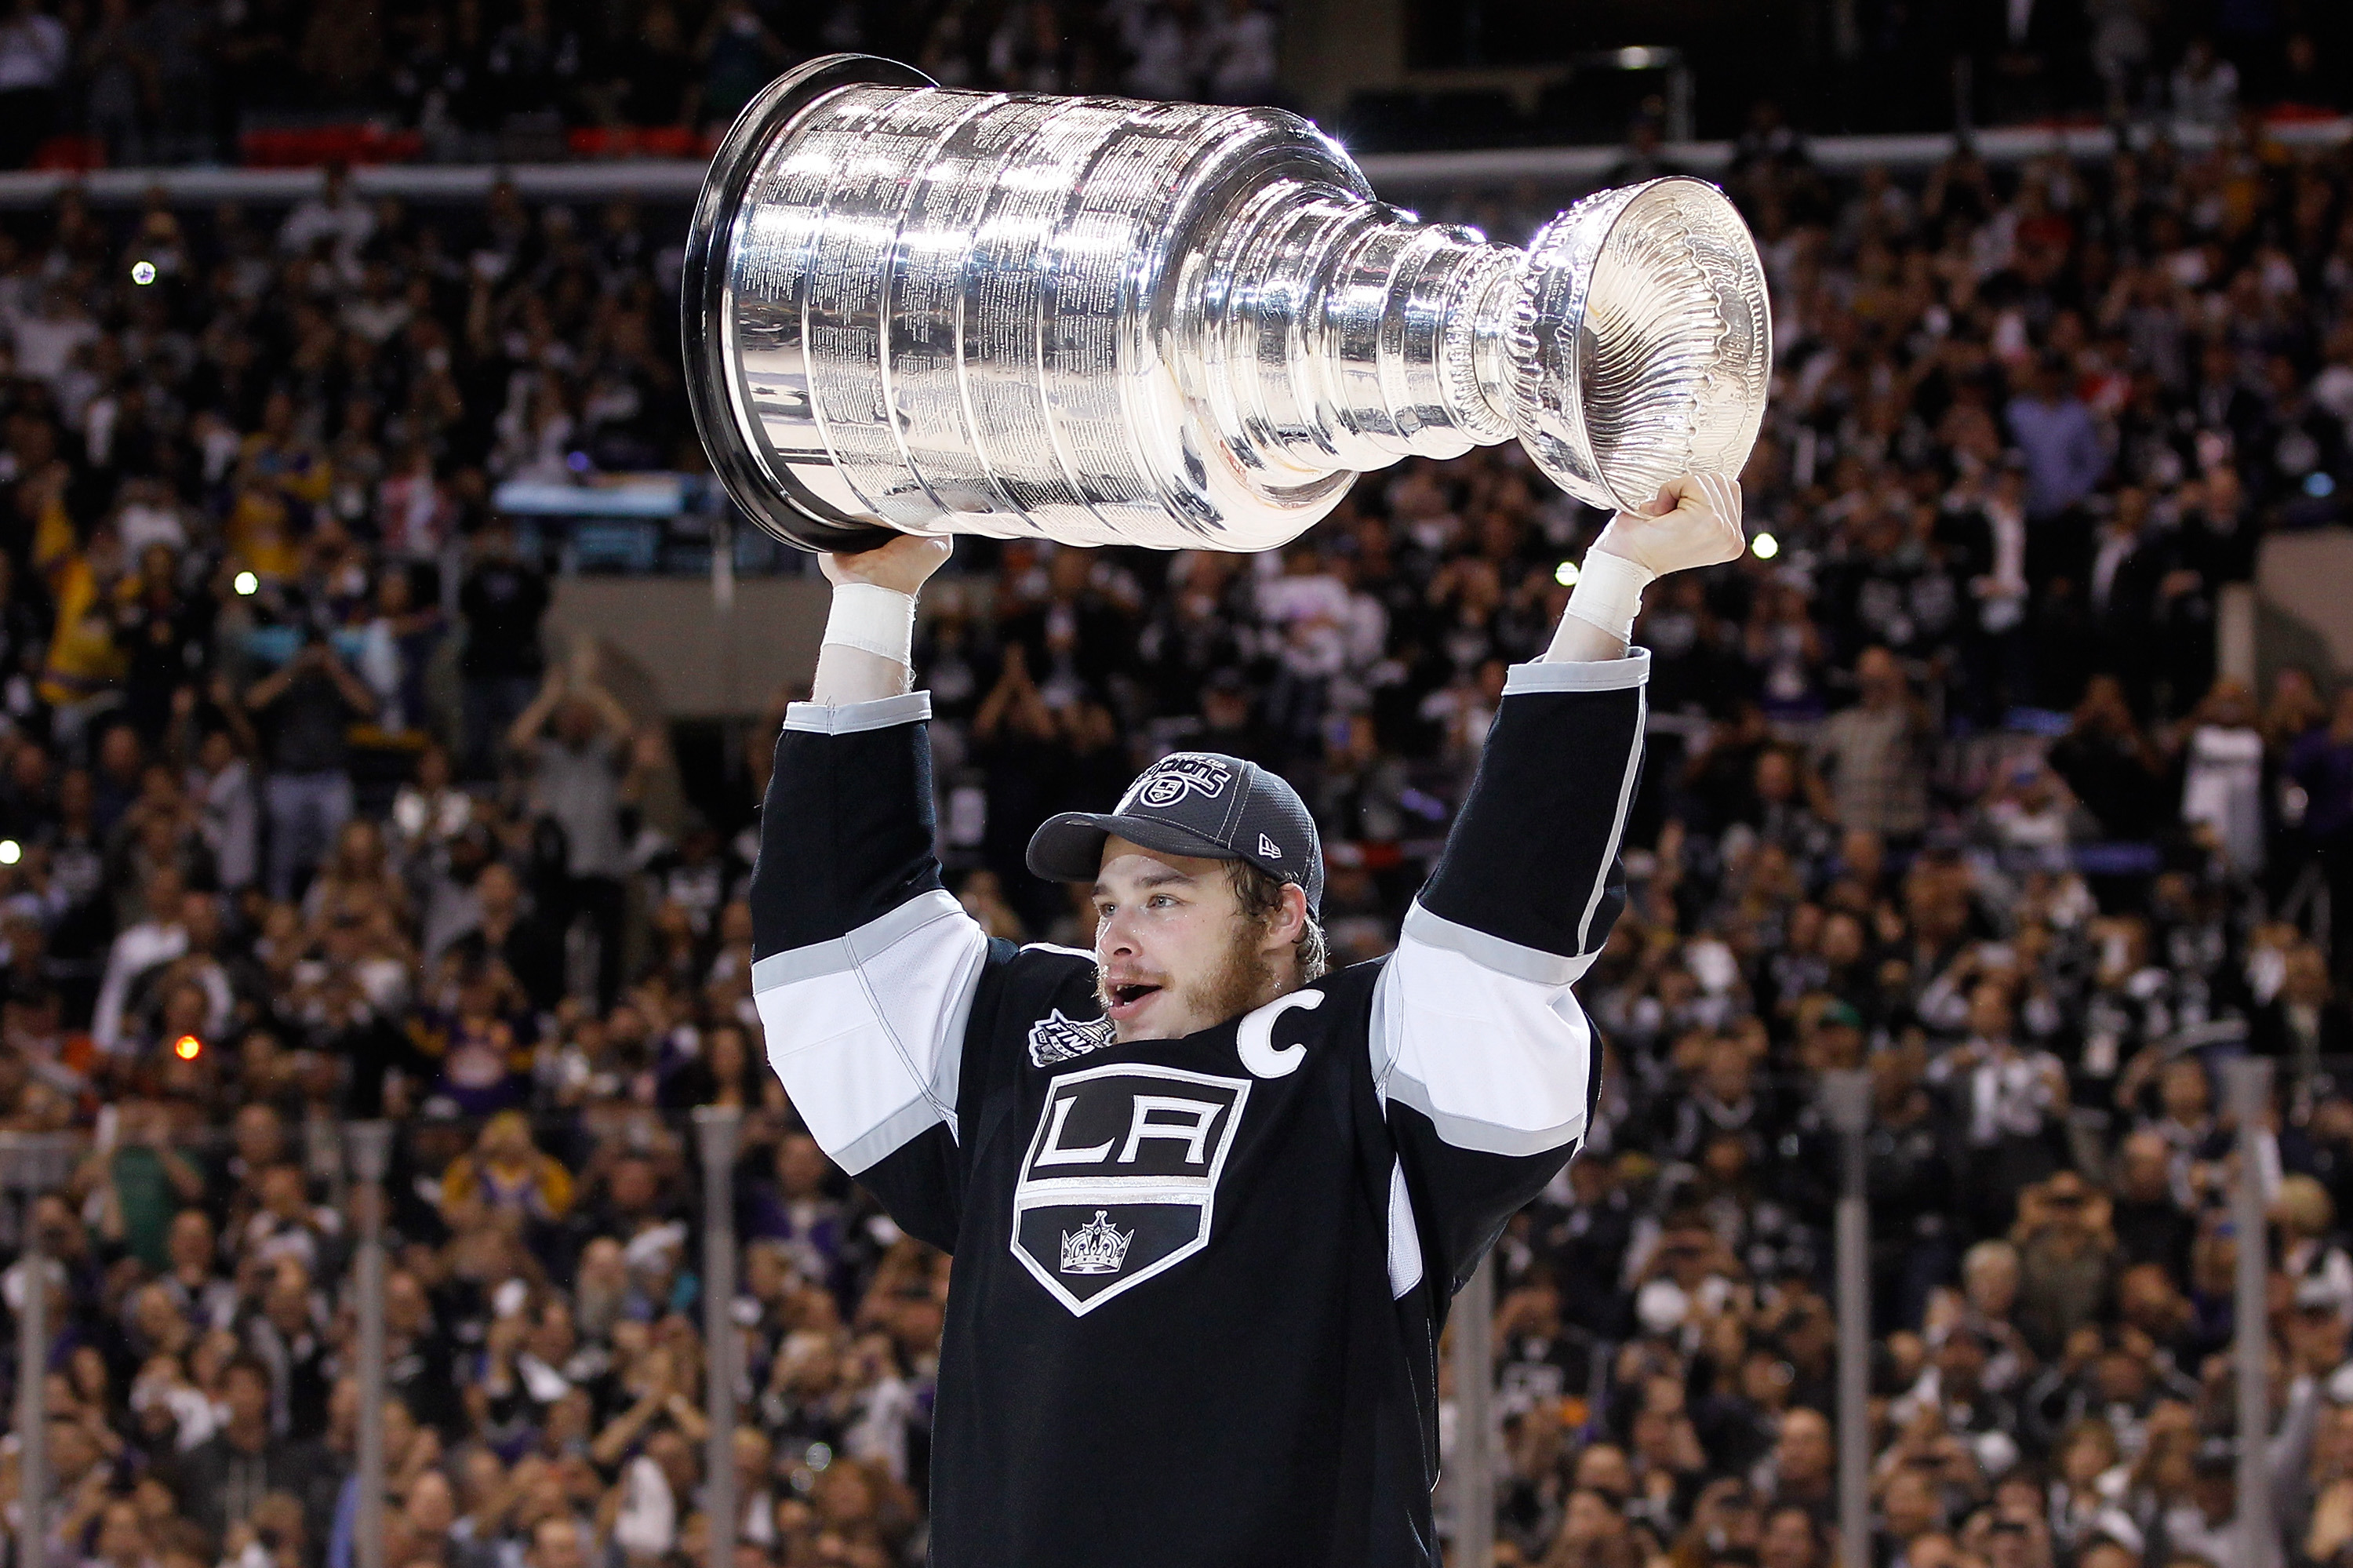 Los Angeles Kings defeat New Jersey Devils to win their first Stanley Cup